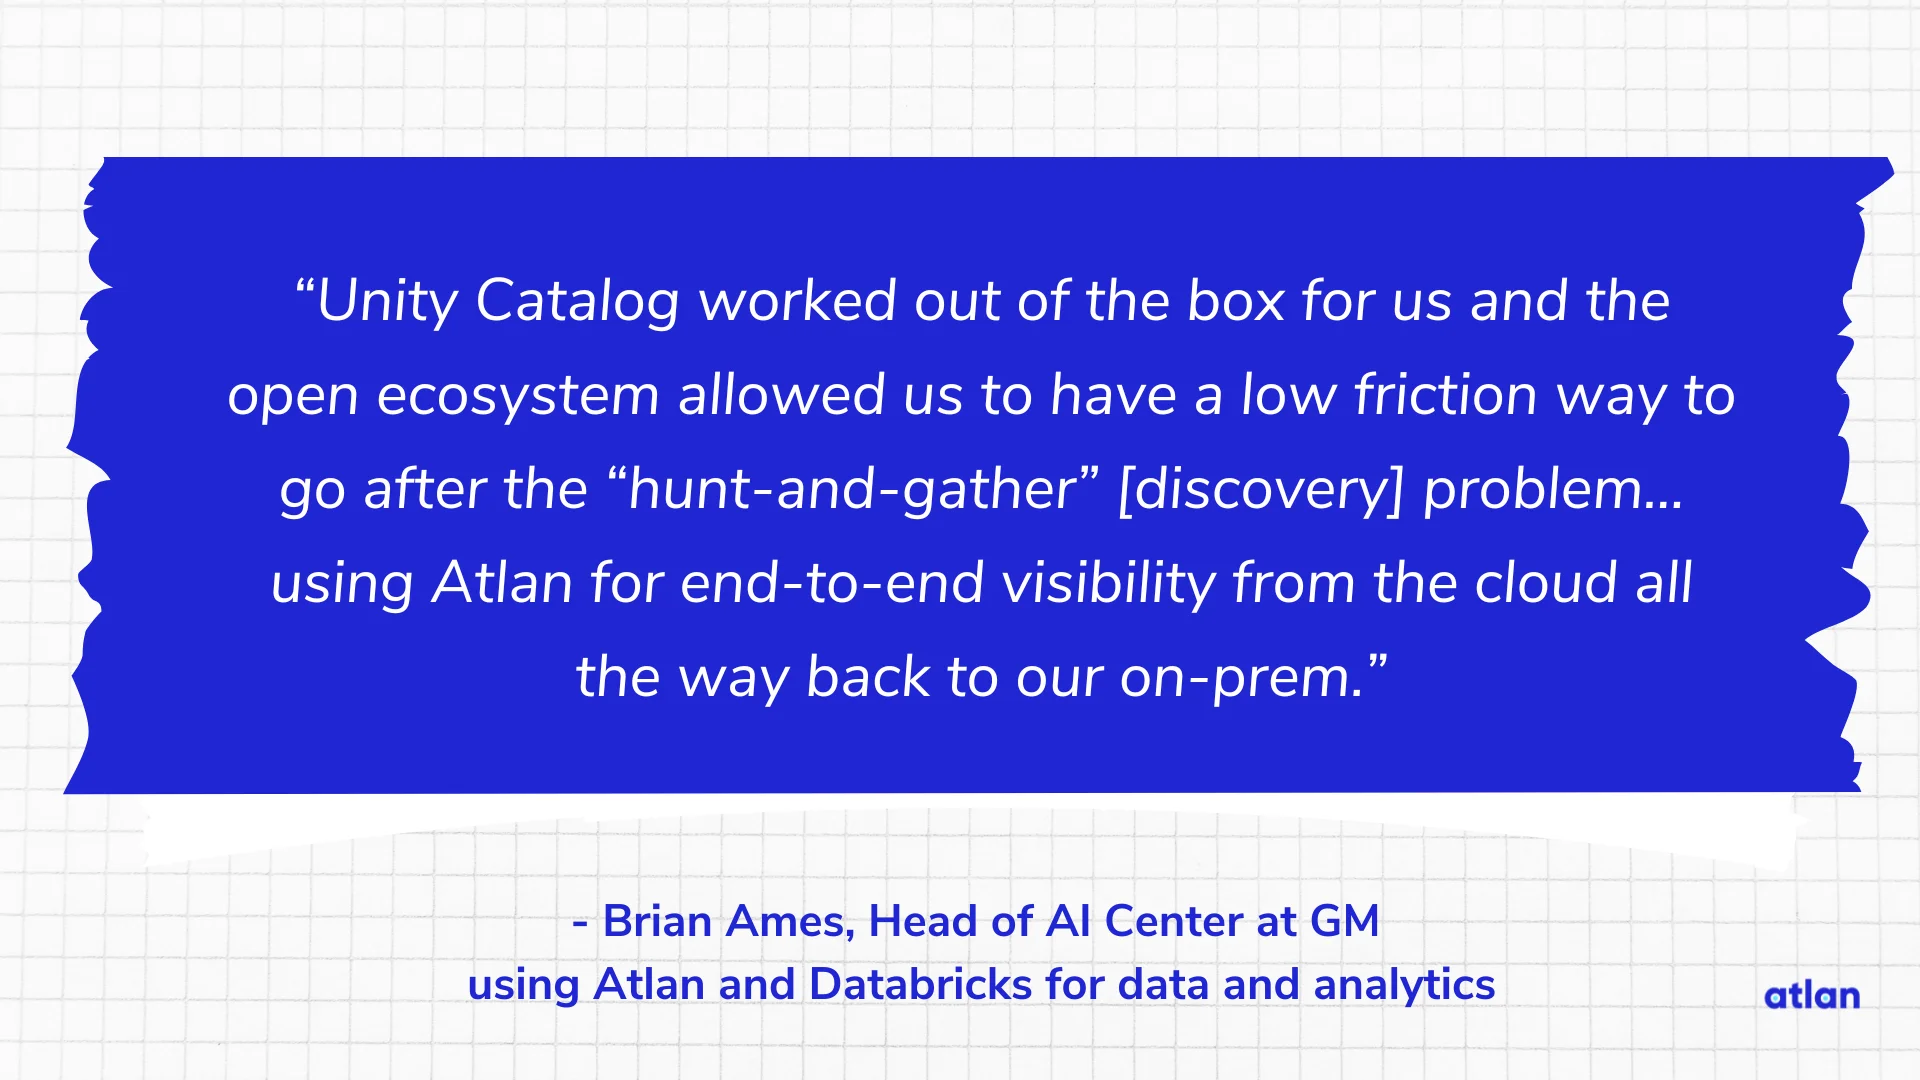 using Atlan for end-to-end visibility from the cloud all the way back to our on-prem